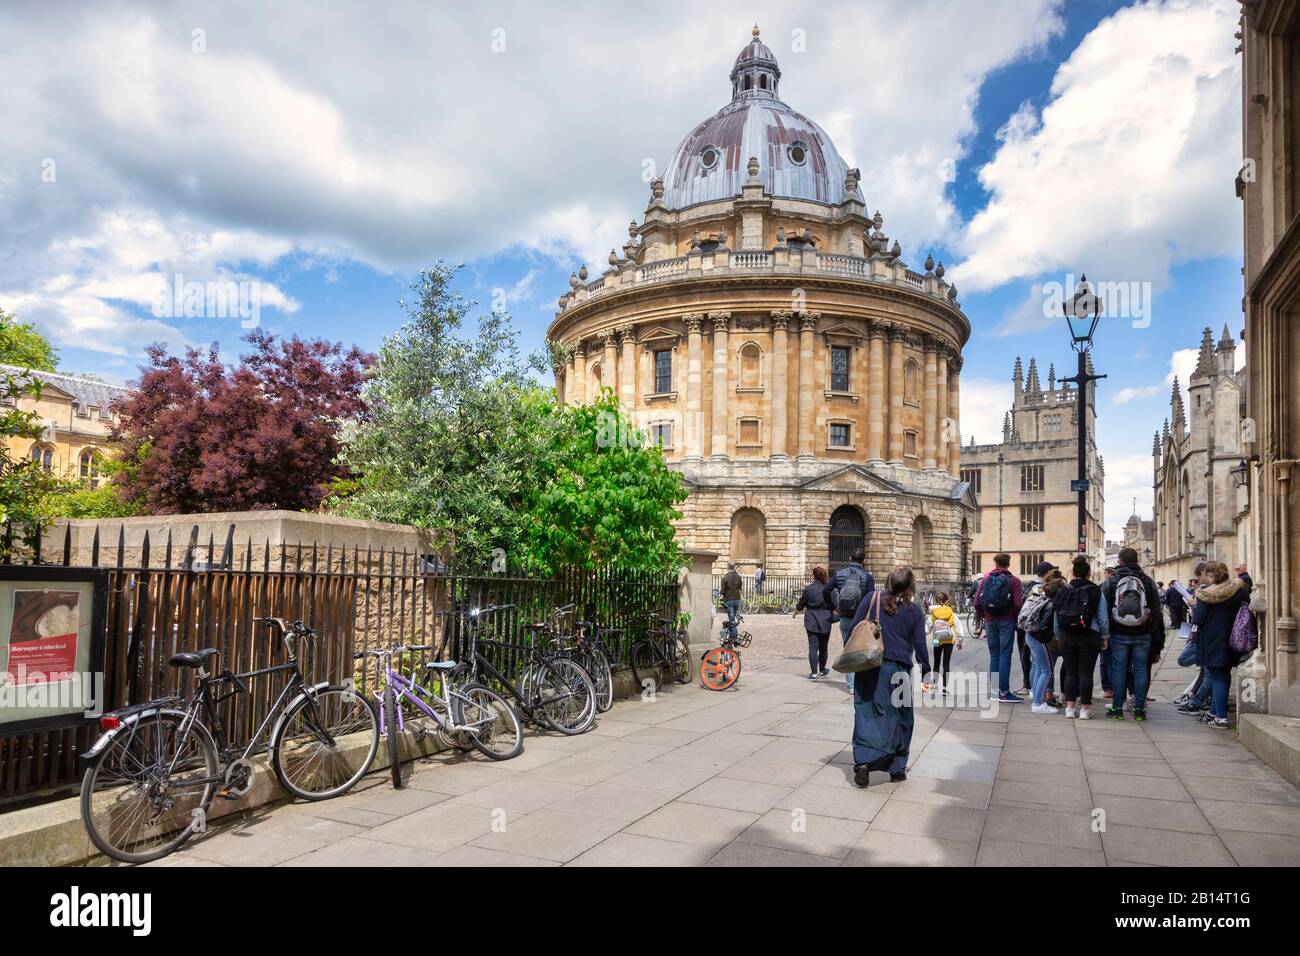 6 June 2019: Oxford, UK - Tourists at the Radcliffe Camera, famous academic library attached to Oxford University, designed by James Gibbs in neo-clas Stock Photo